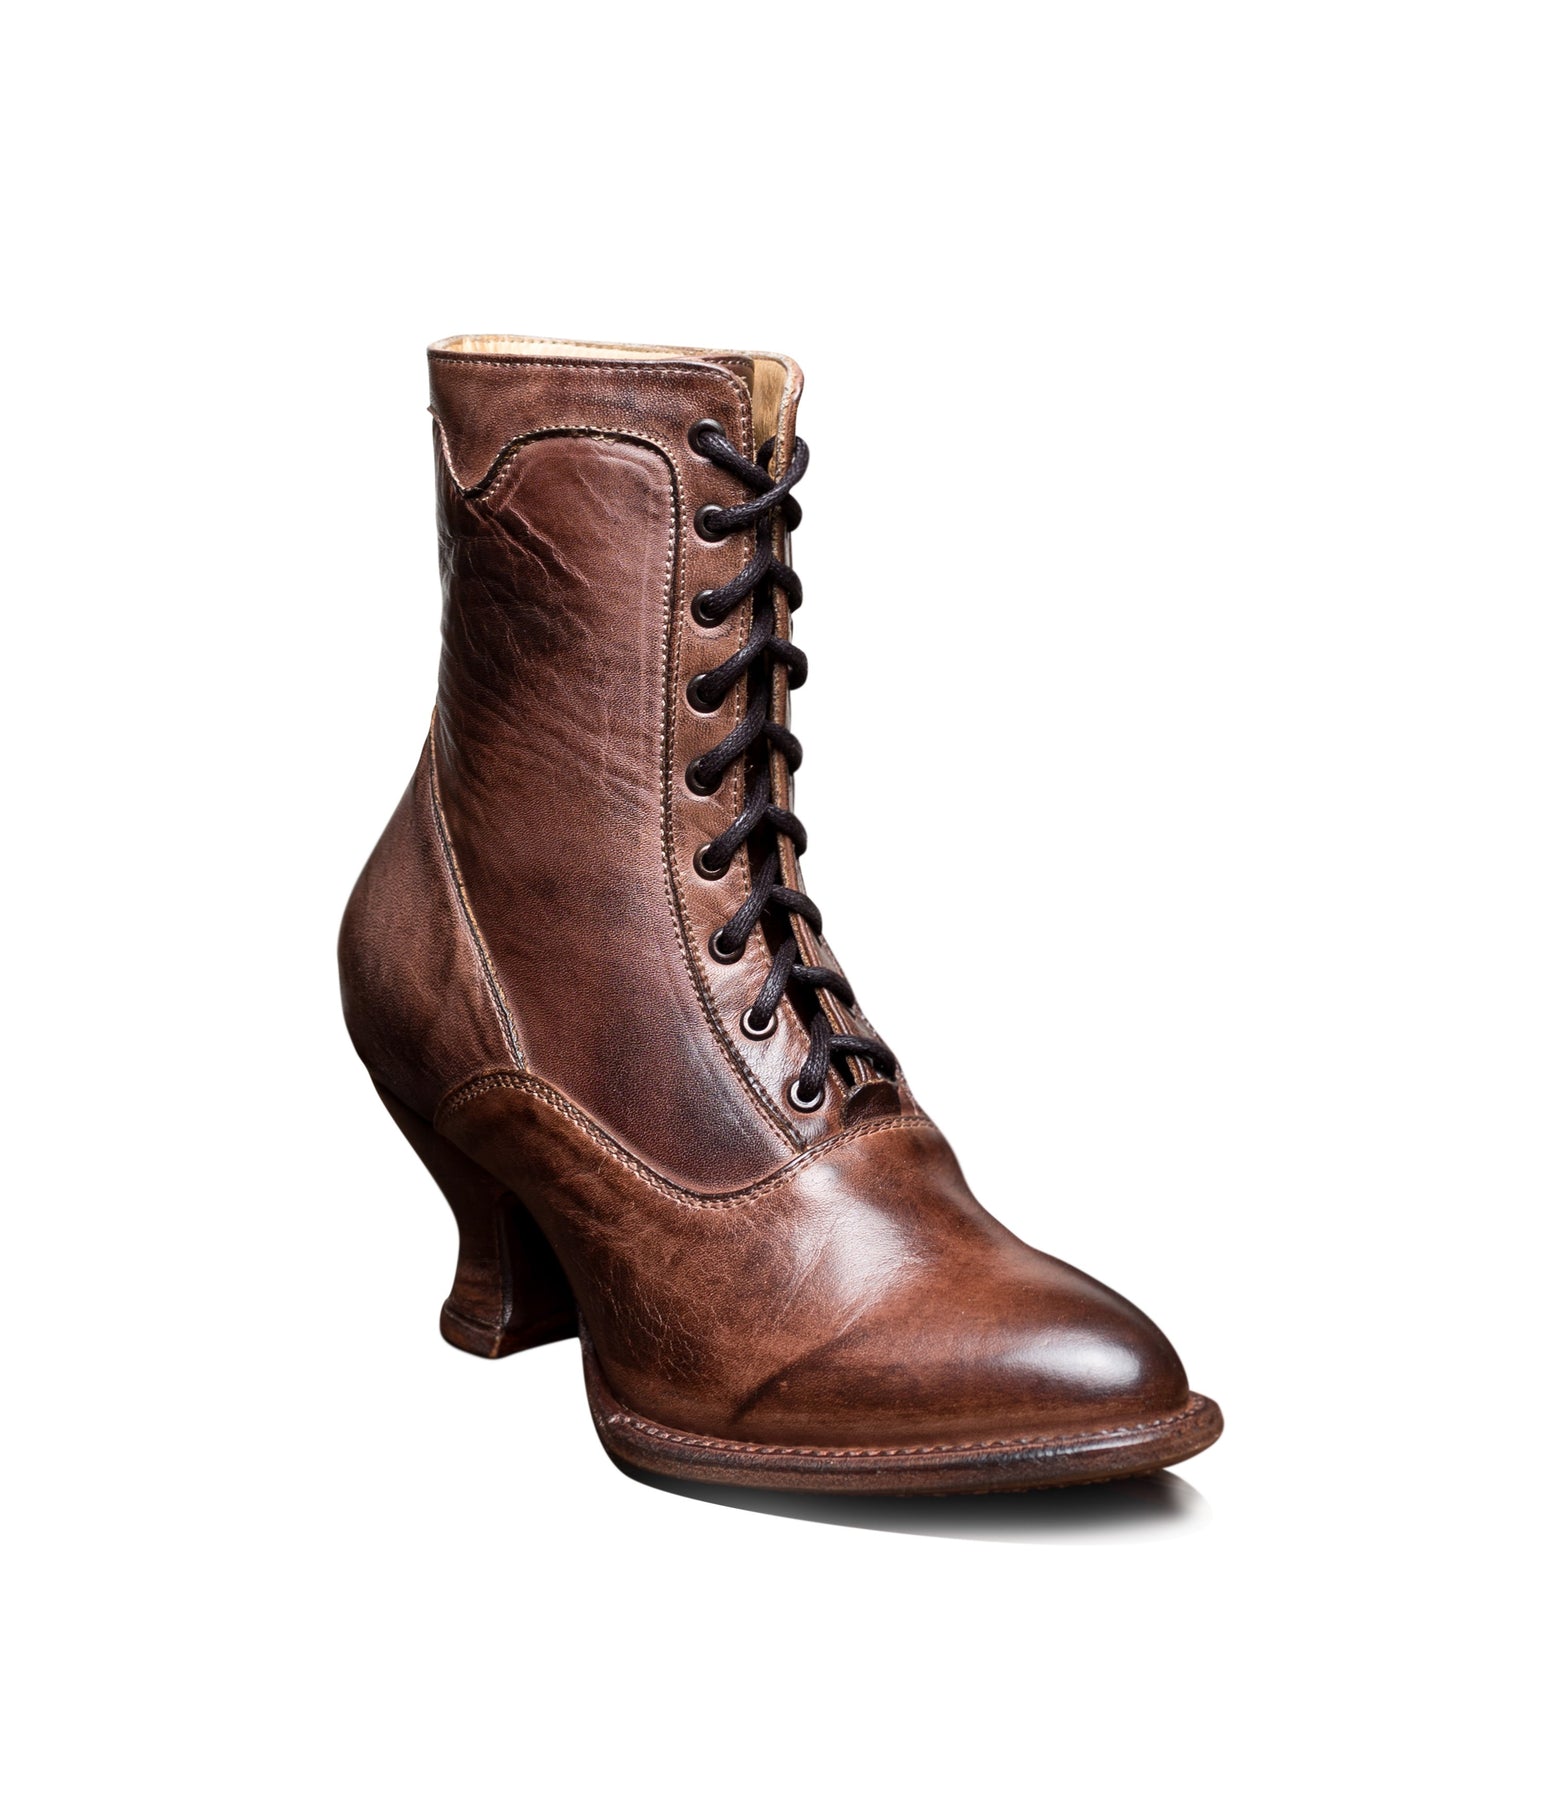 Victorian Inspired Leather ankle Boots in Tan Rustic by Oak Tree Farms ...